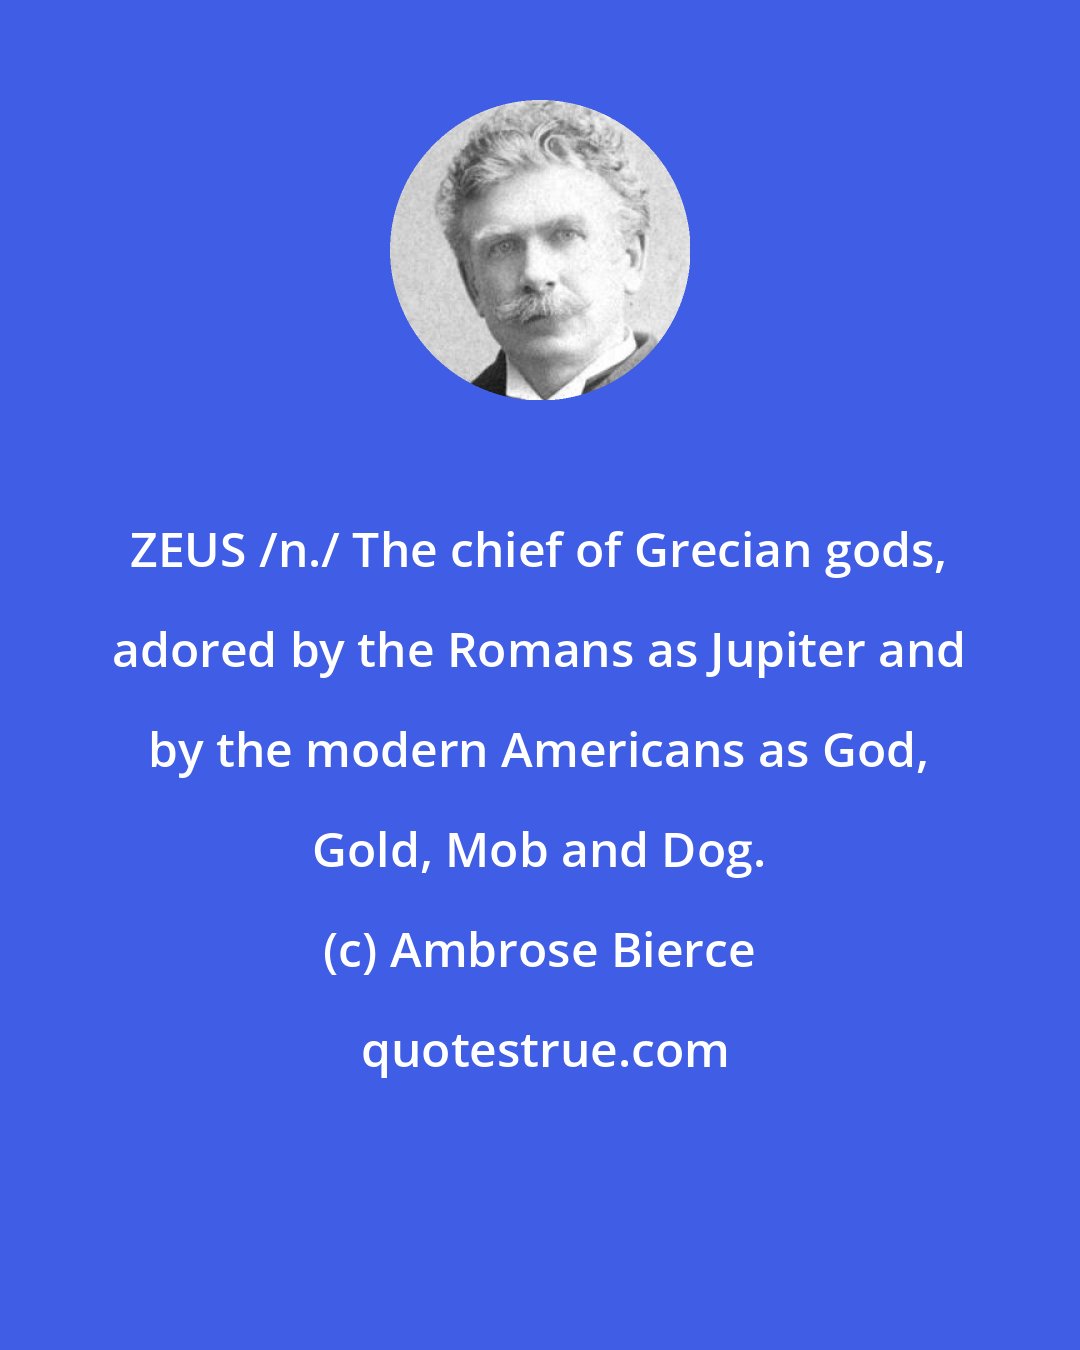 Ambrose Bierce: ZEUS /n./ The chief of Grecian gods, adored by the Romans as Jupiter and by the modern Americans as God, Gold, Mob and Dog.